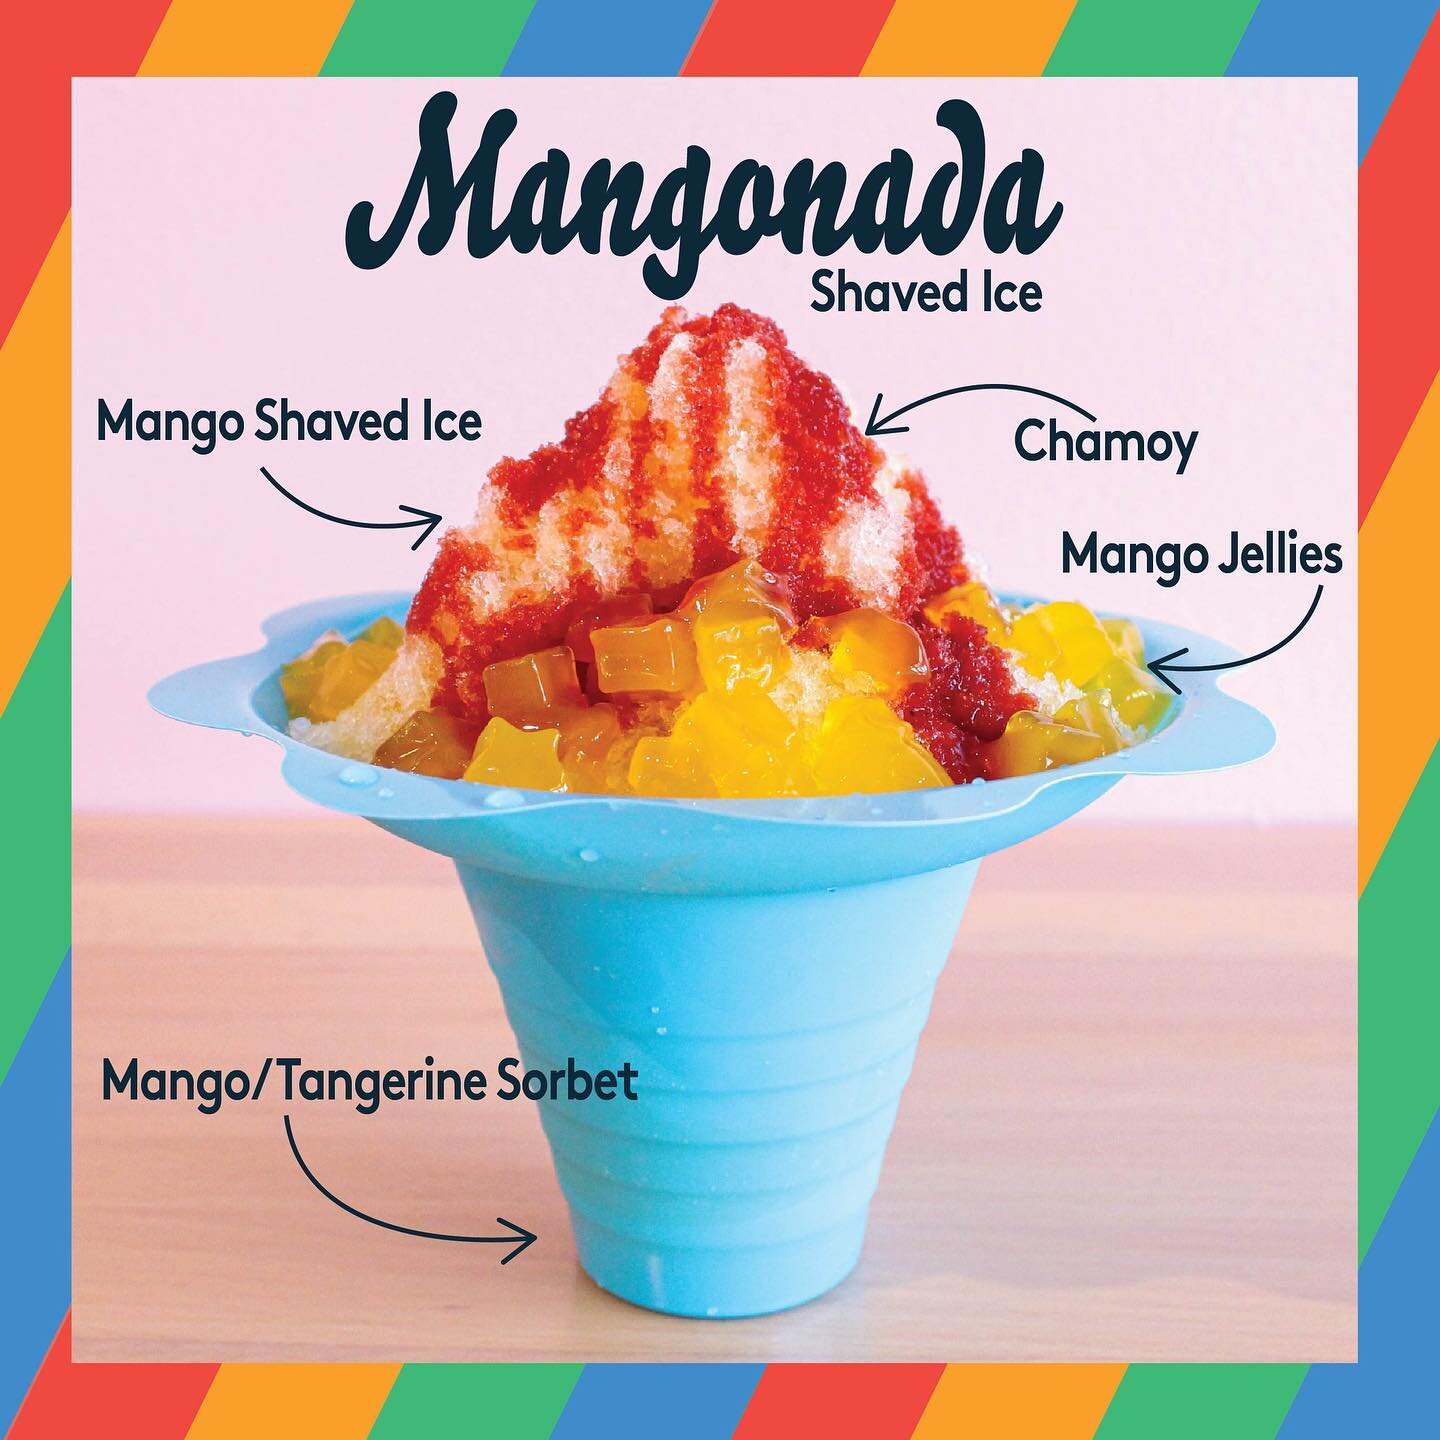 🎉 Exciting news! We just got a new shaved ice machine that produces even softer and fluffier ice! 🍧 Our shaved ice desserts are now even more refreshing and delicious, perfect for those hot summer days ☀️ 

To celebrate, we&rsquo;re releasing our n